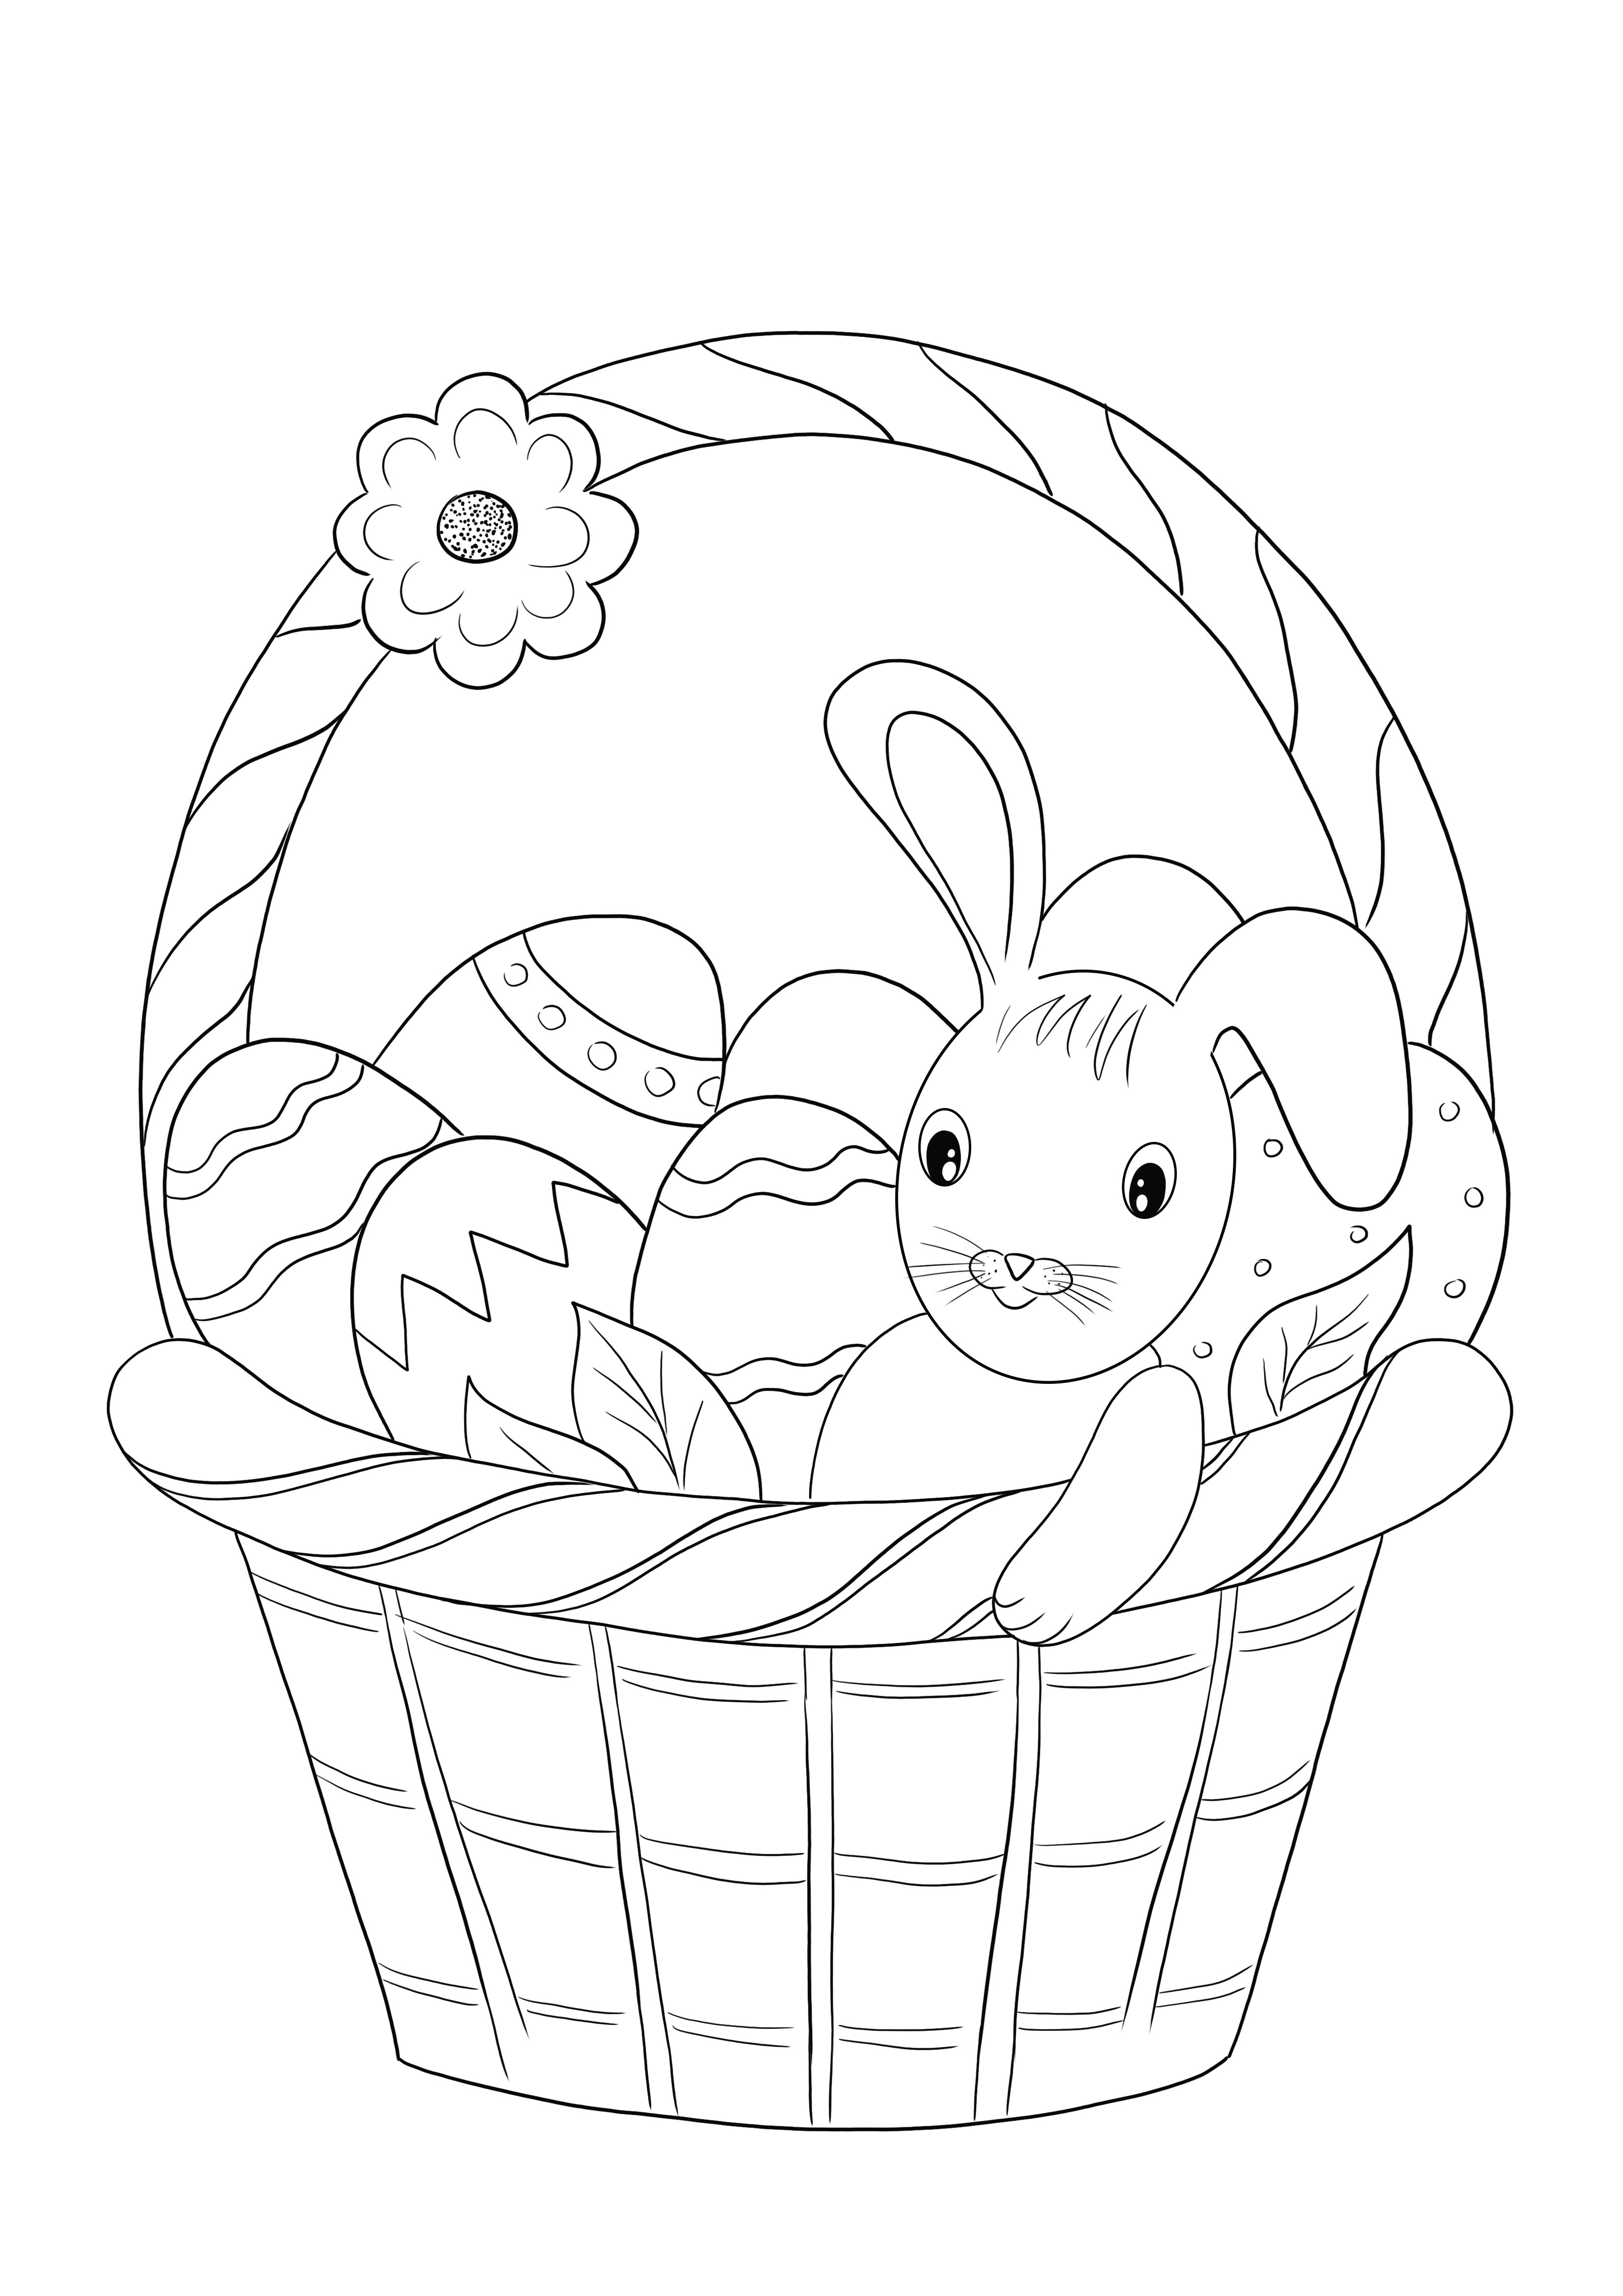 An Easter Basket full of goodies is ready to be downloaded and colored by kids